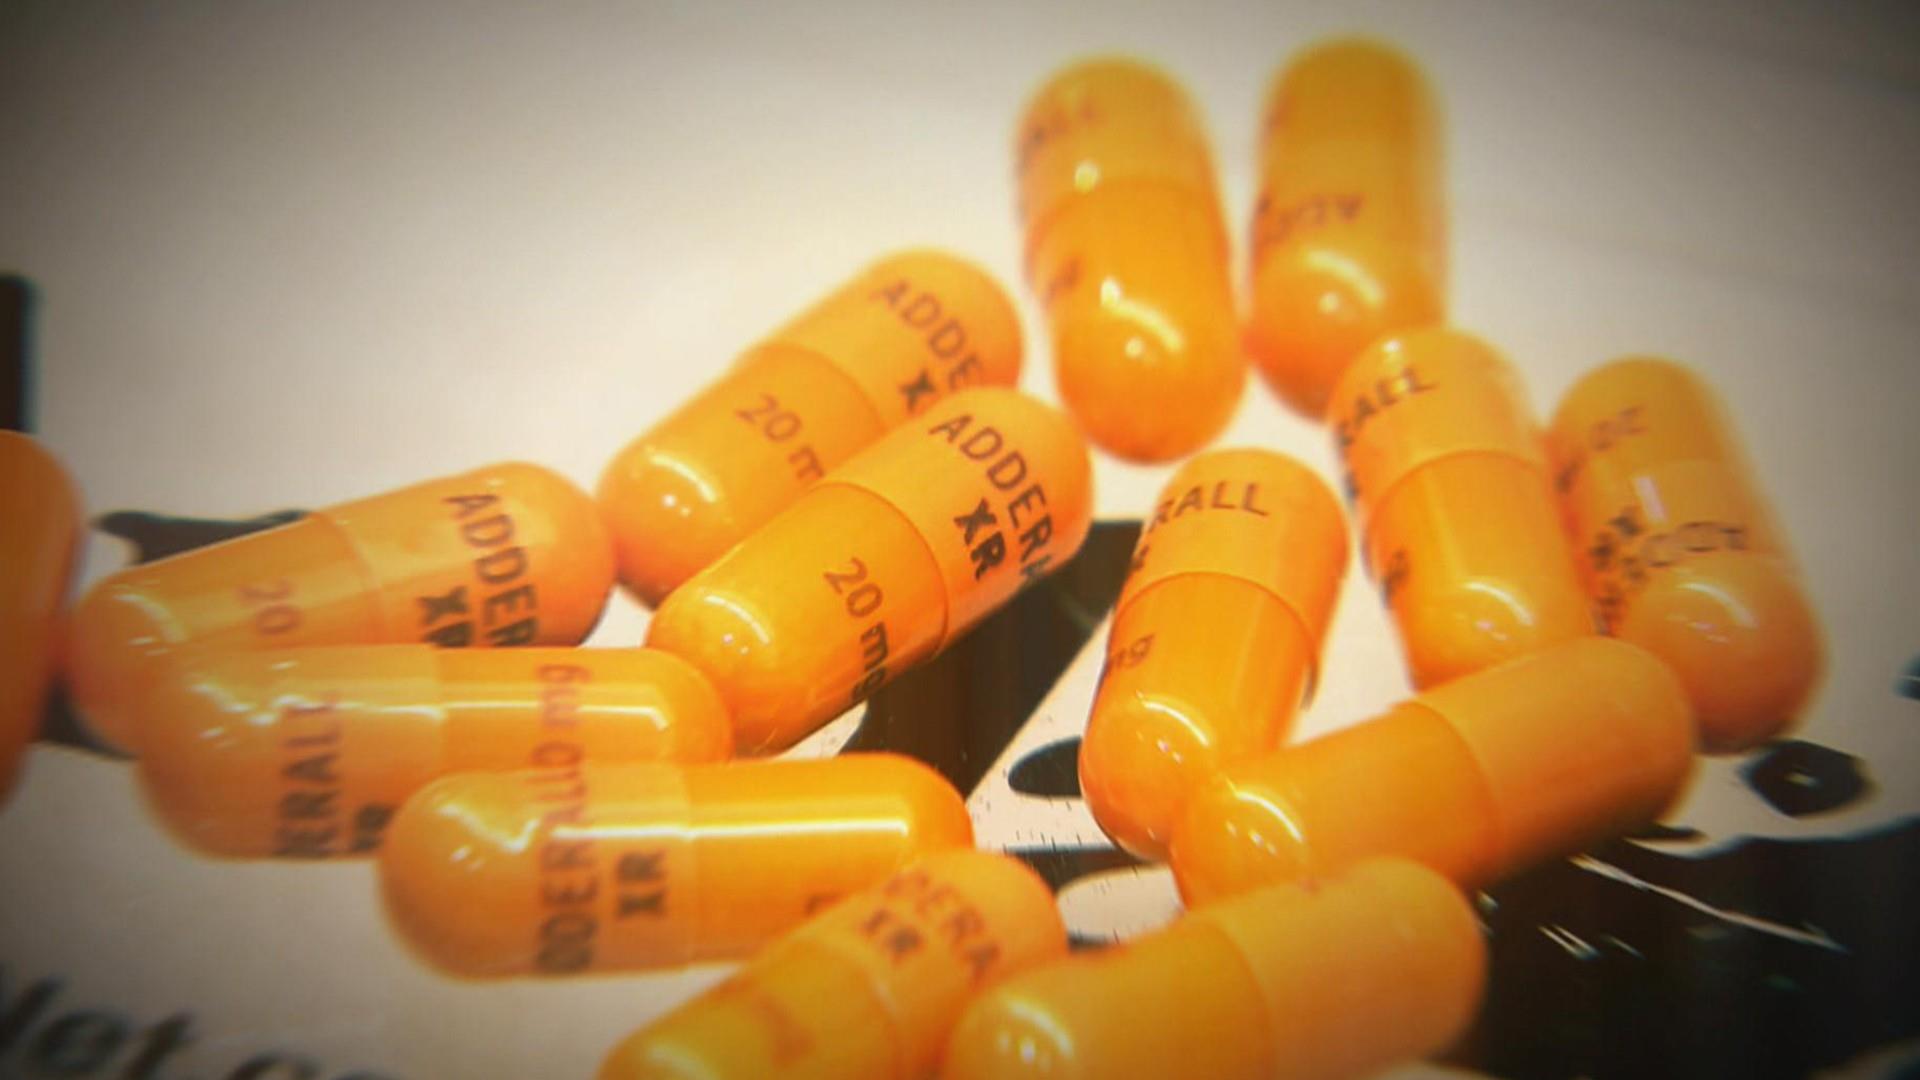 ‘Smart drug’ abuse is focus of Netflix documentary ‘Take Your Pills’